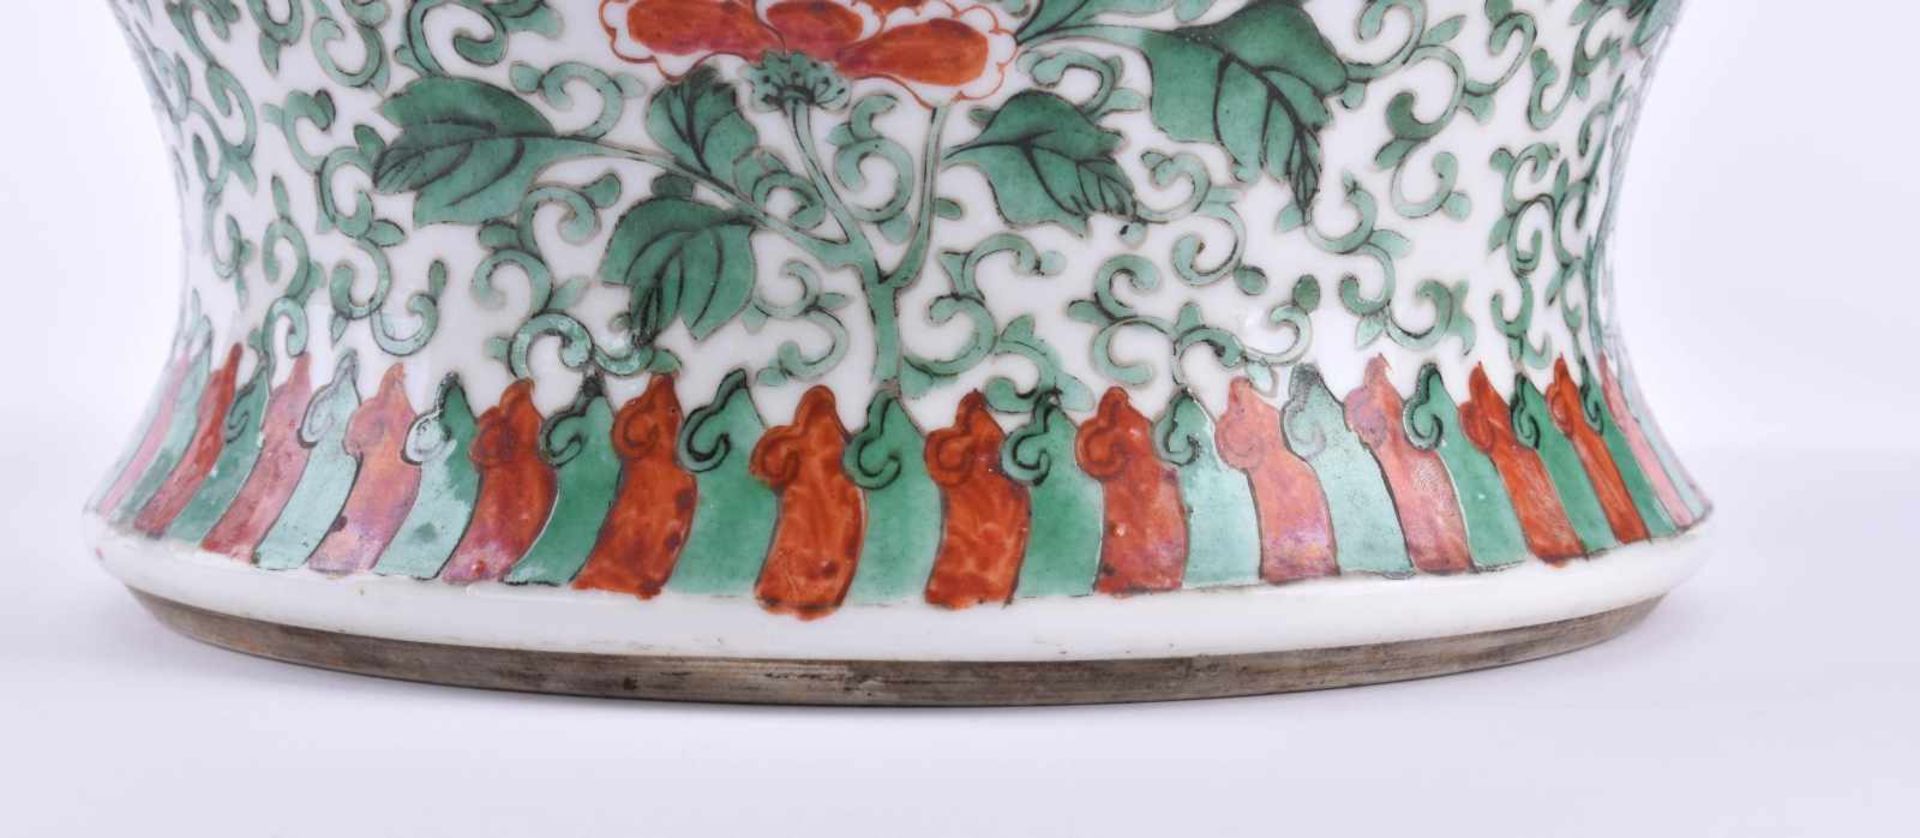 Famille Verte shoulder pot China Qing period, Daoguang?circumferential painted in different colors - Image 6 of 8